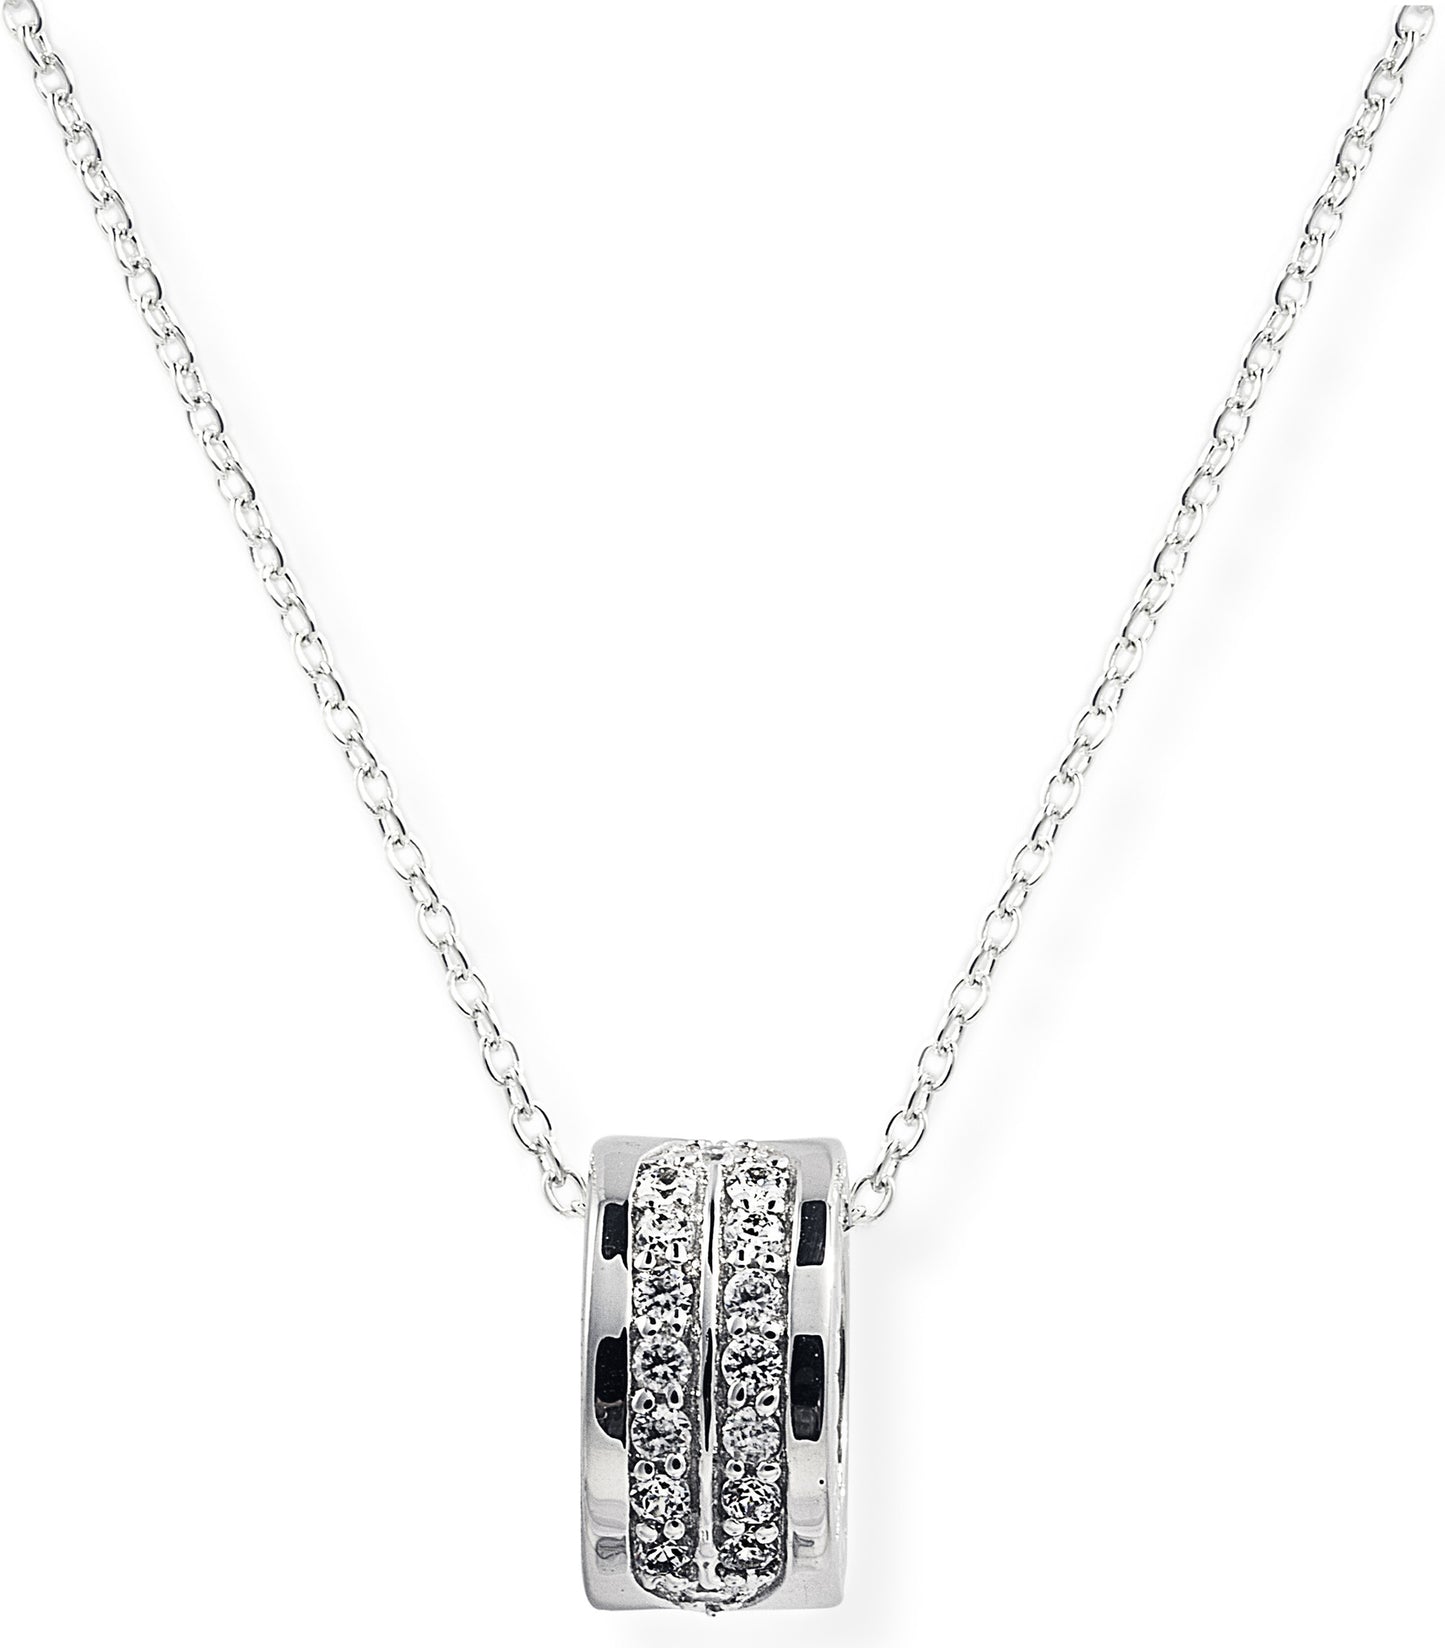 The Zion Bling Necklace is a solid 925 sterling silver necklace that features clear cubic zirconia stones and our signature Roman Numerals on the sides. Result: Takes you to Europe.  Make it yours with worldwide shipping.